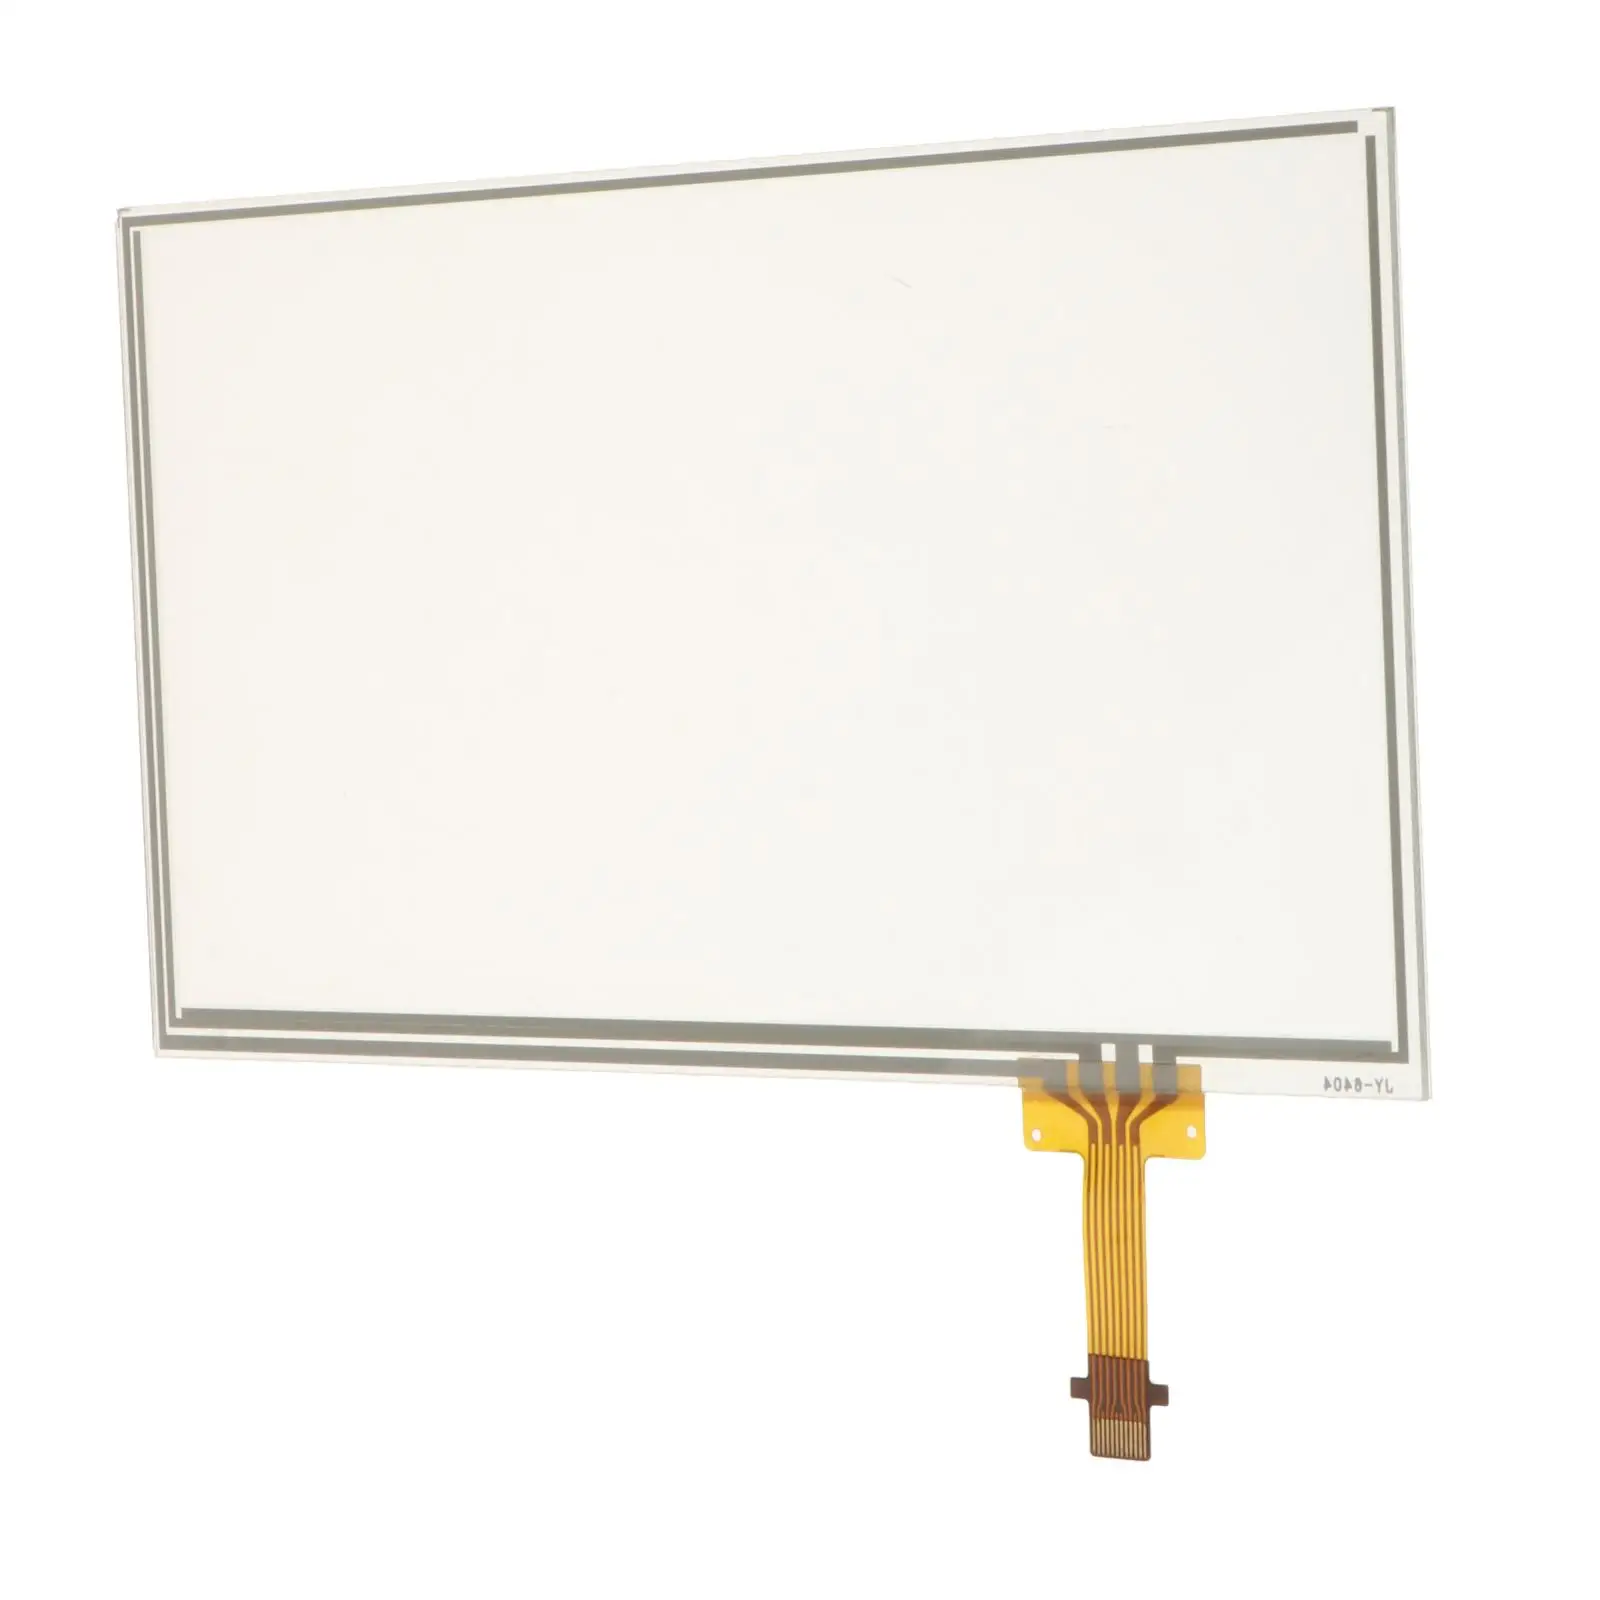 6.1 inch Touch Screen Glass Digitizer Navigation Fits for RAV -18, Easy to Install and Replace